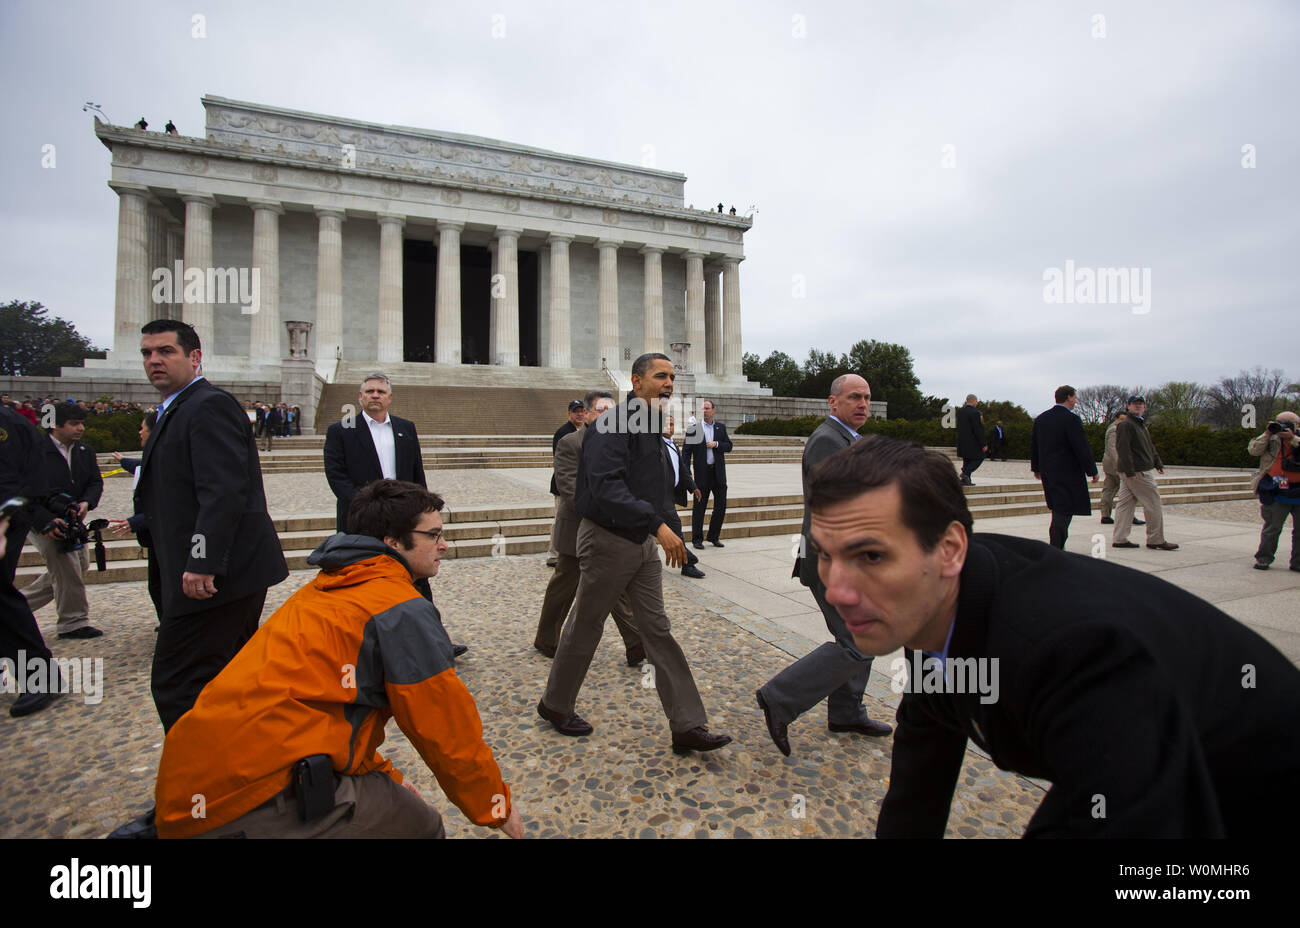 Staff and Secret Service agents scramble out the way as U.S. President Barack Obama makes a surprise visit to the Lincoln Memorial and shakes hands with tourists a day after budget negotiations with Congress prevented a government shutdown in Washington, DC, on 9 April, 2011.  UPI/Jim Lo Scalzo Stock Photo